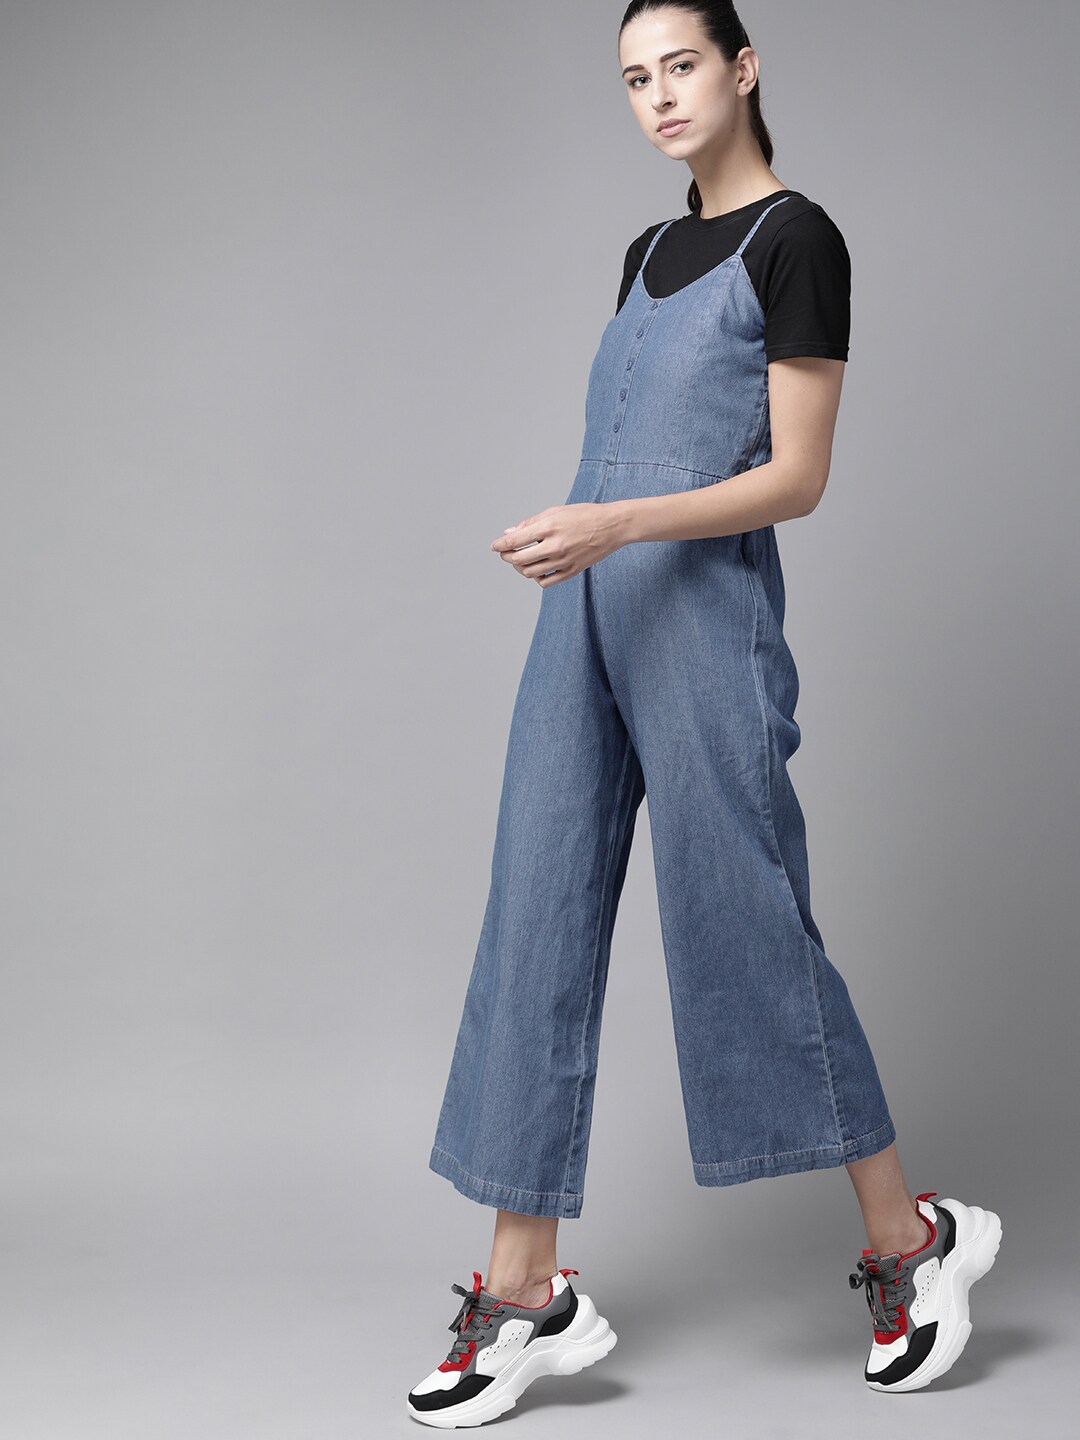 The Roadster Lifestyle Co Blue Pure Cotton Basic Denim Jumpsuit Price in India